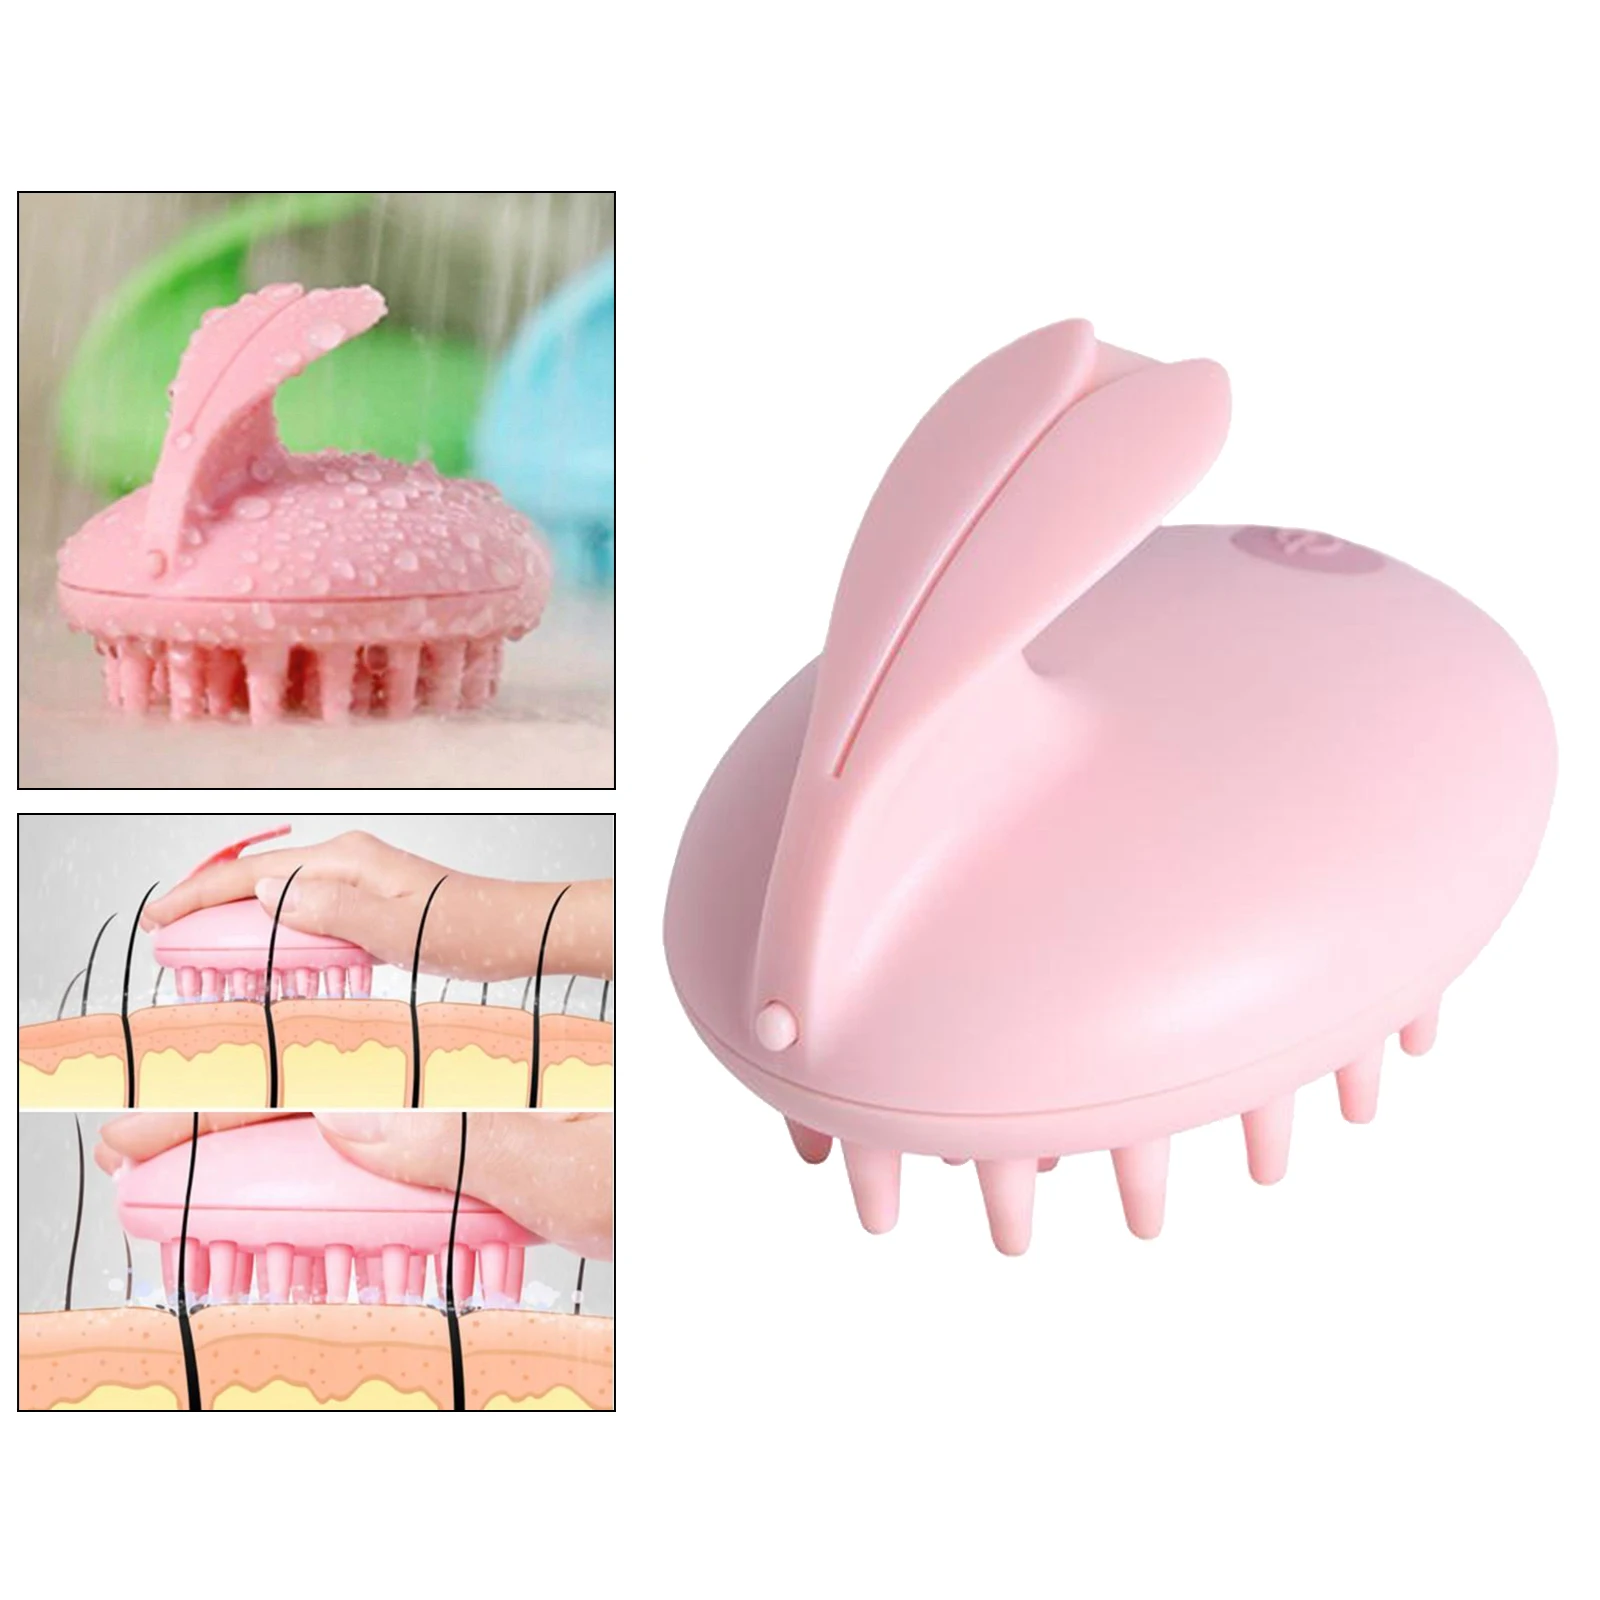 Scalp Vibrating Massaging Shampoo Brush - Handheld Massager, Water-Resistant - 2 Colors to Select